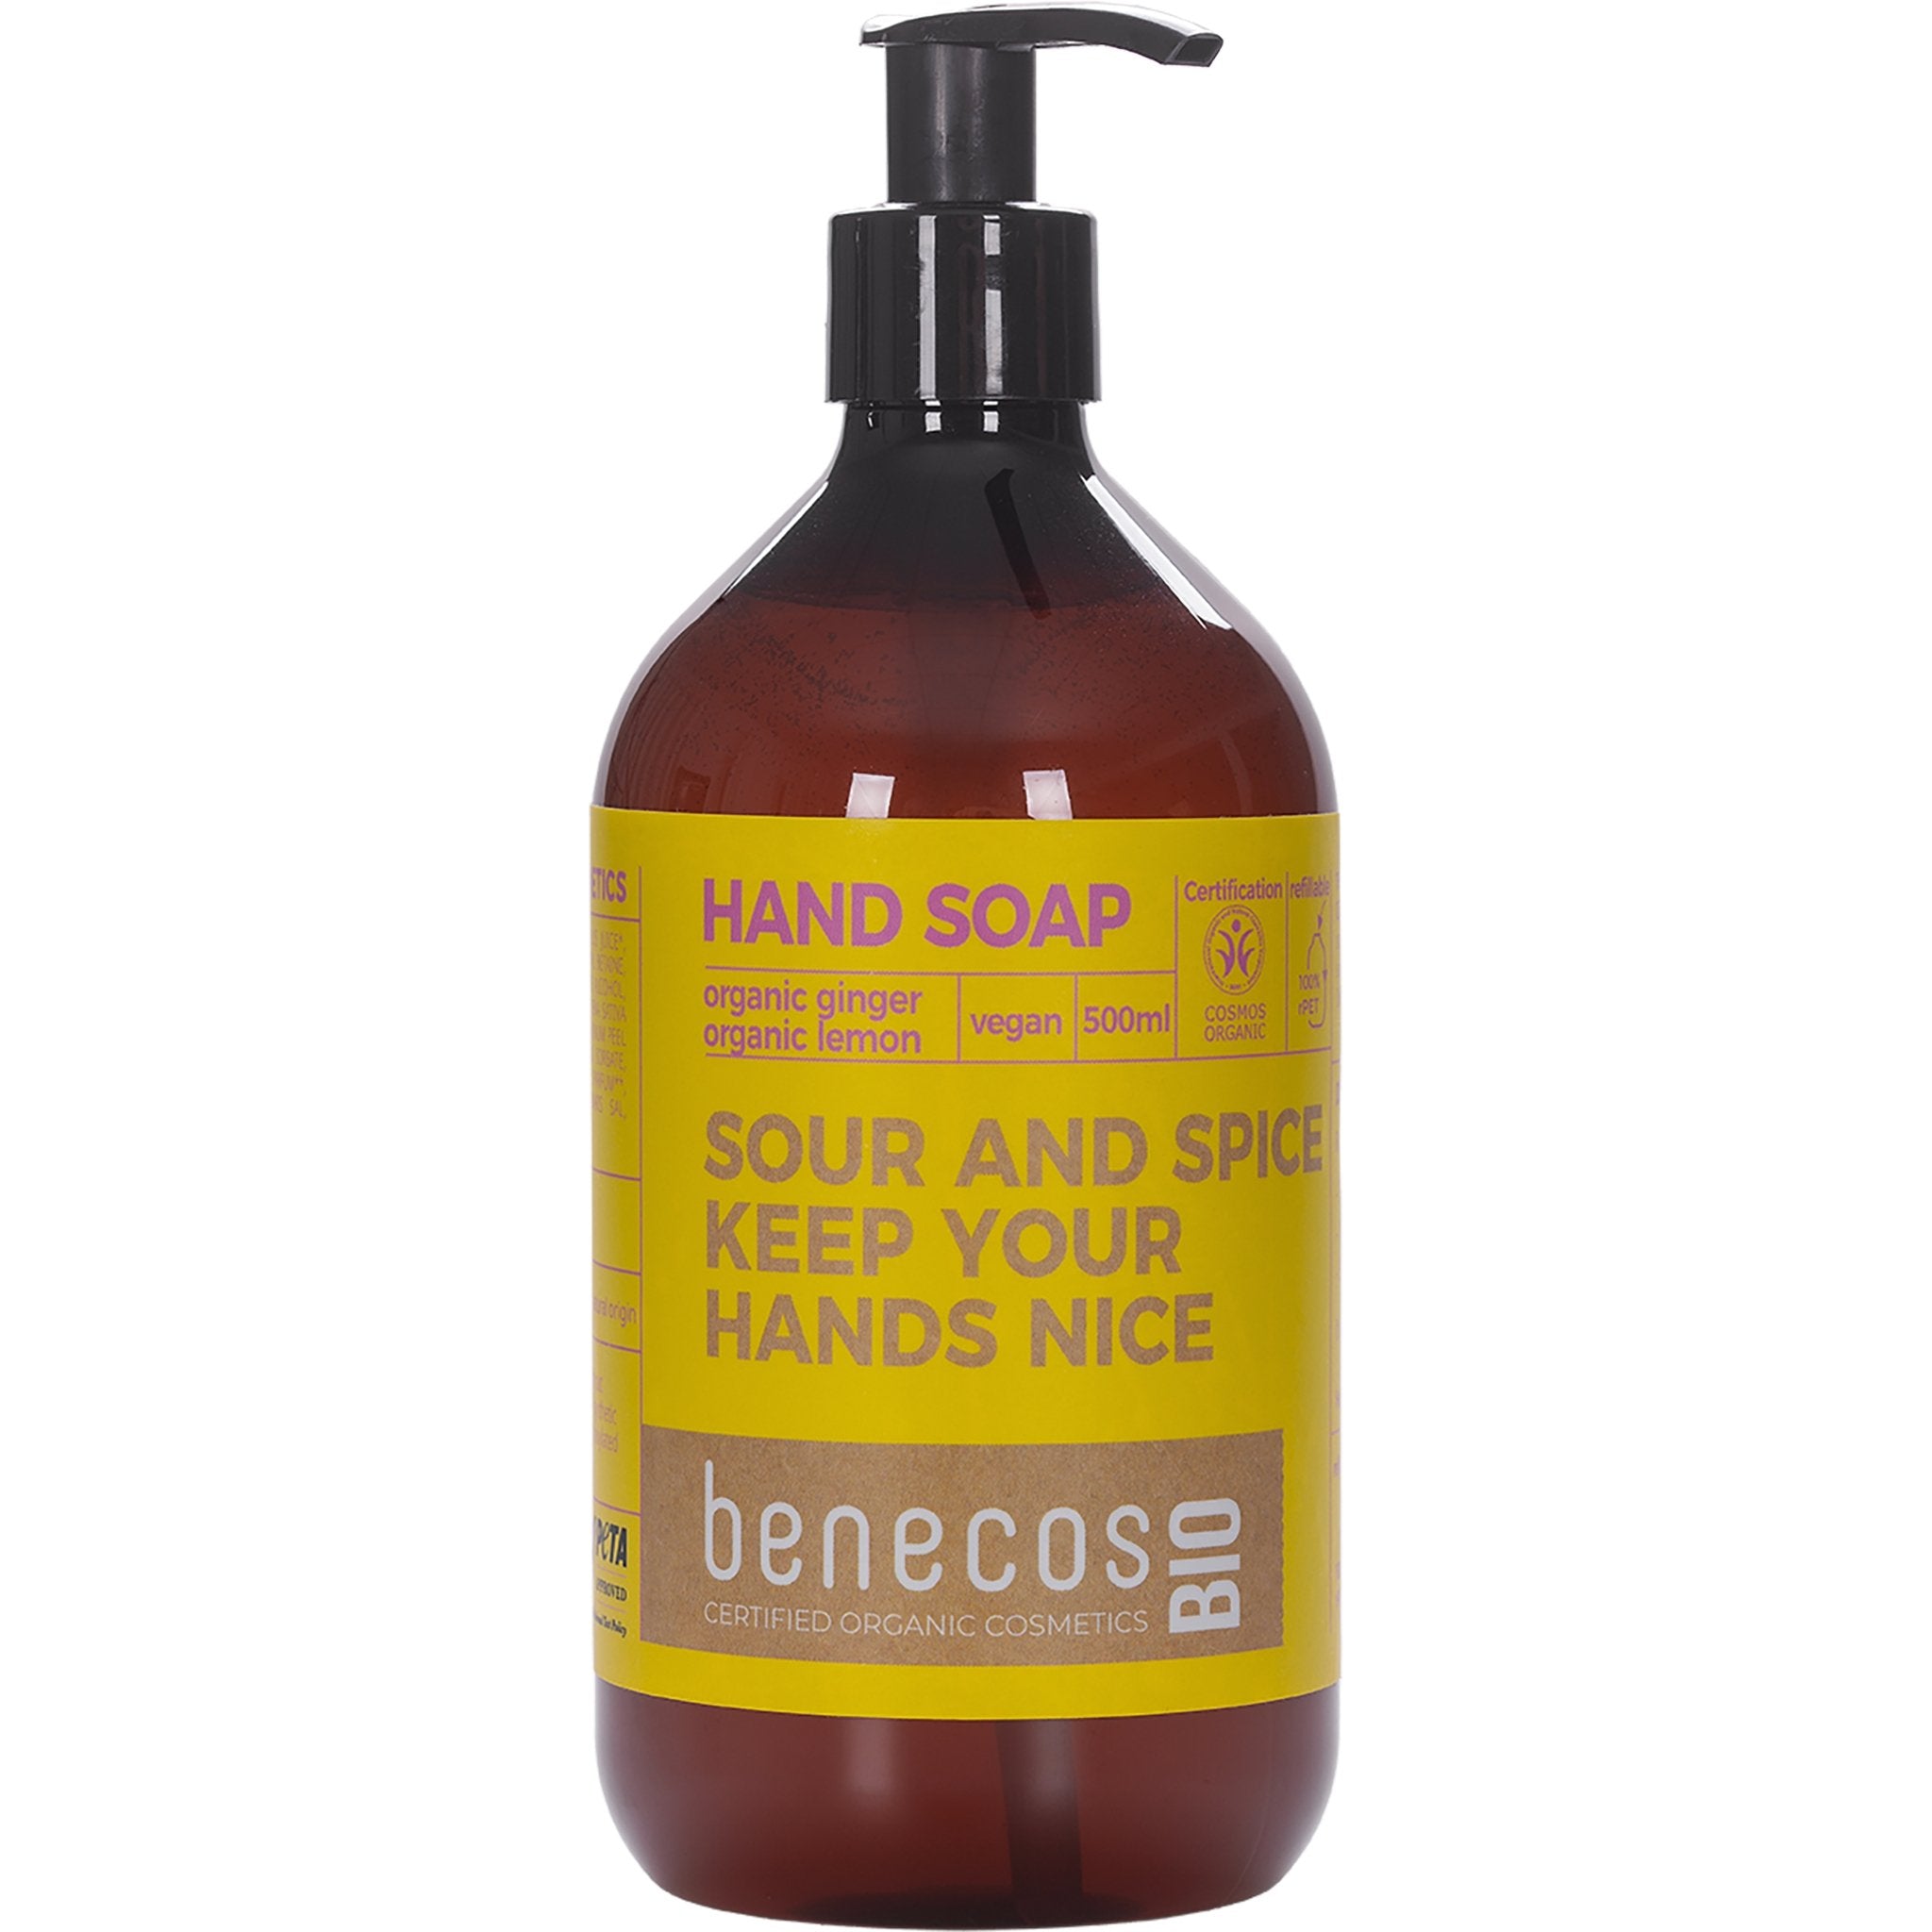 NEW Sour And Spice Keep Your Hands Nice Hand Soap - mypure.co.uk